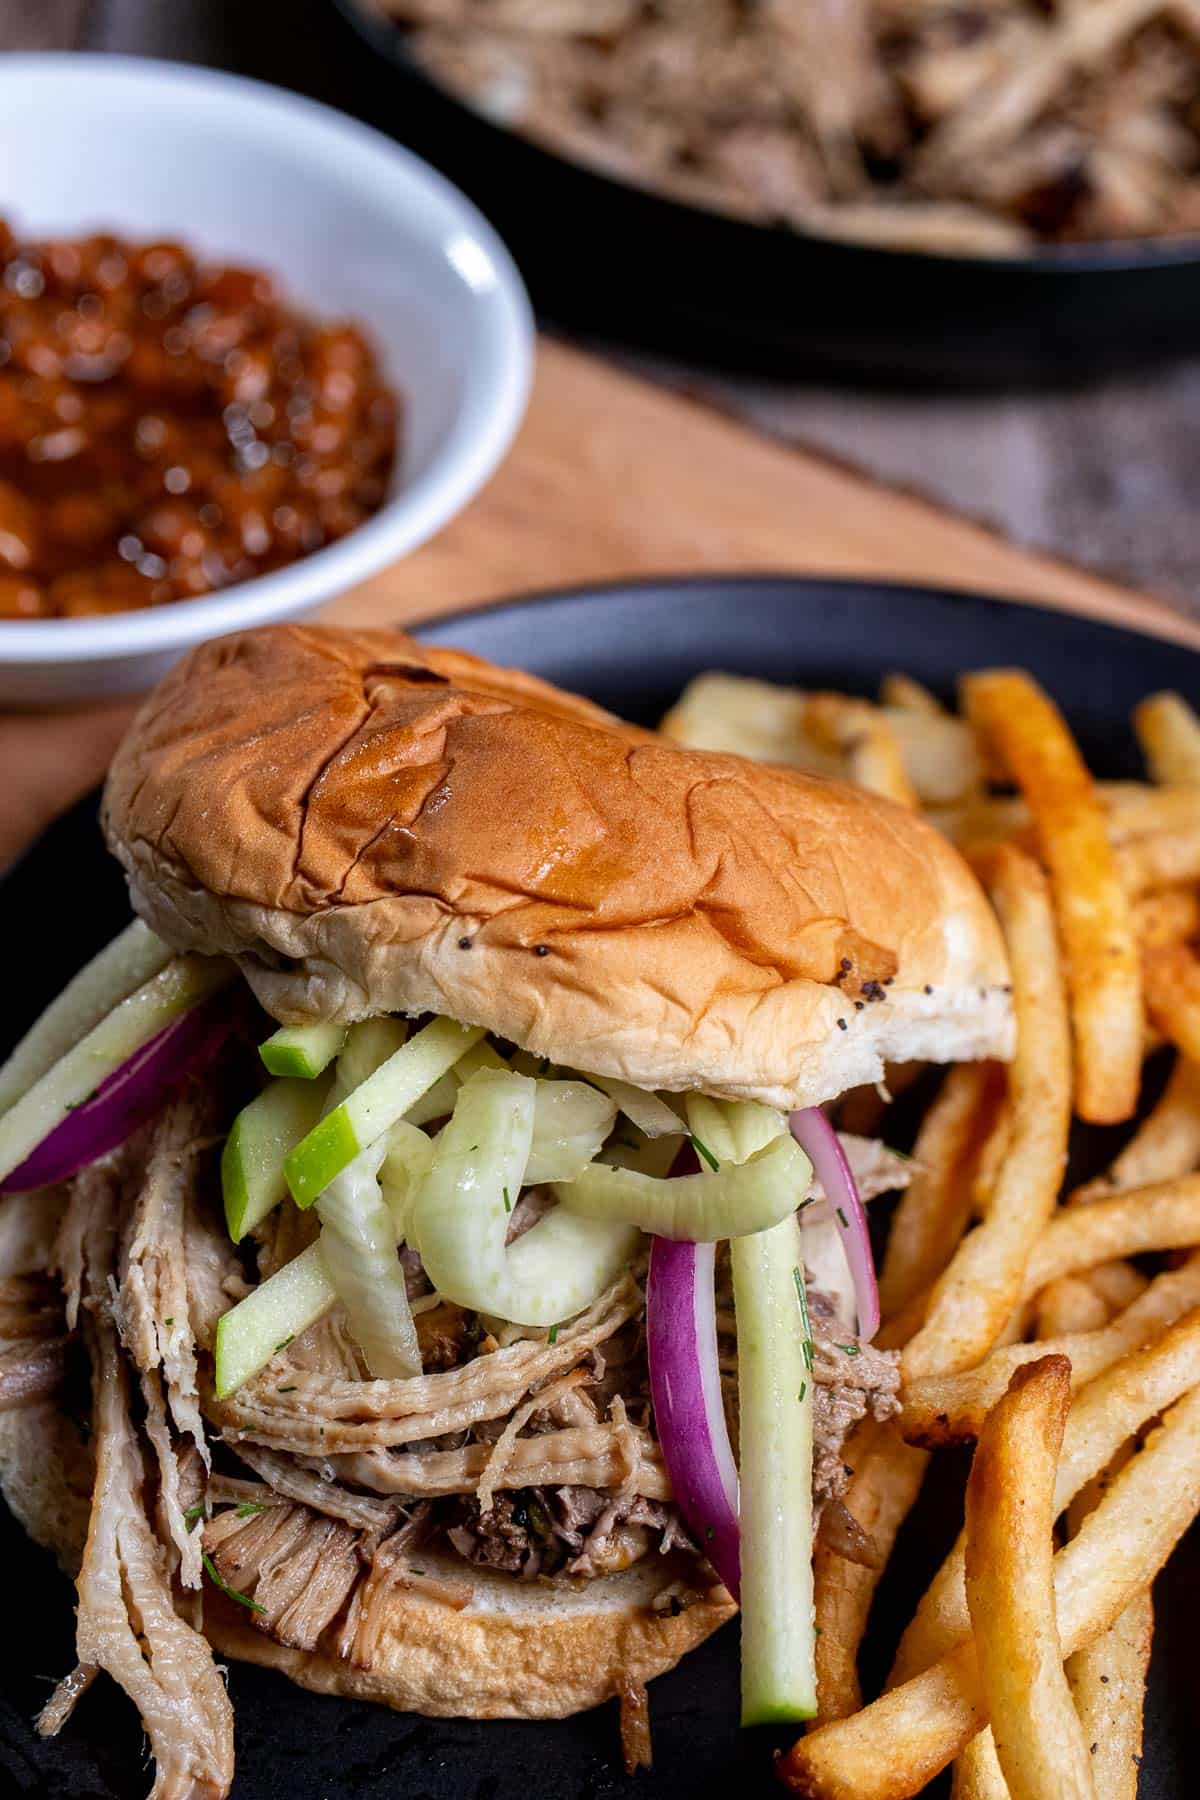 Cider braised pulled pork on an onion roll topped with fennel apple slaw and served with French fries on a black plate.